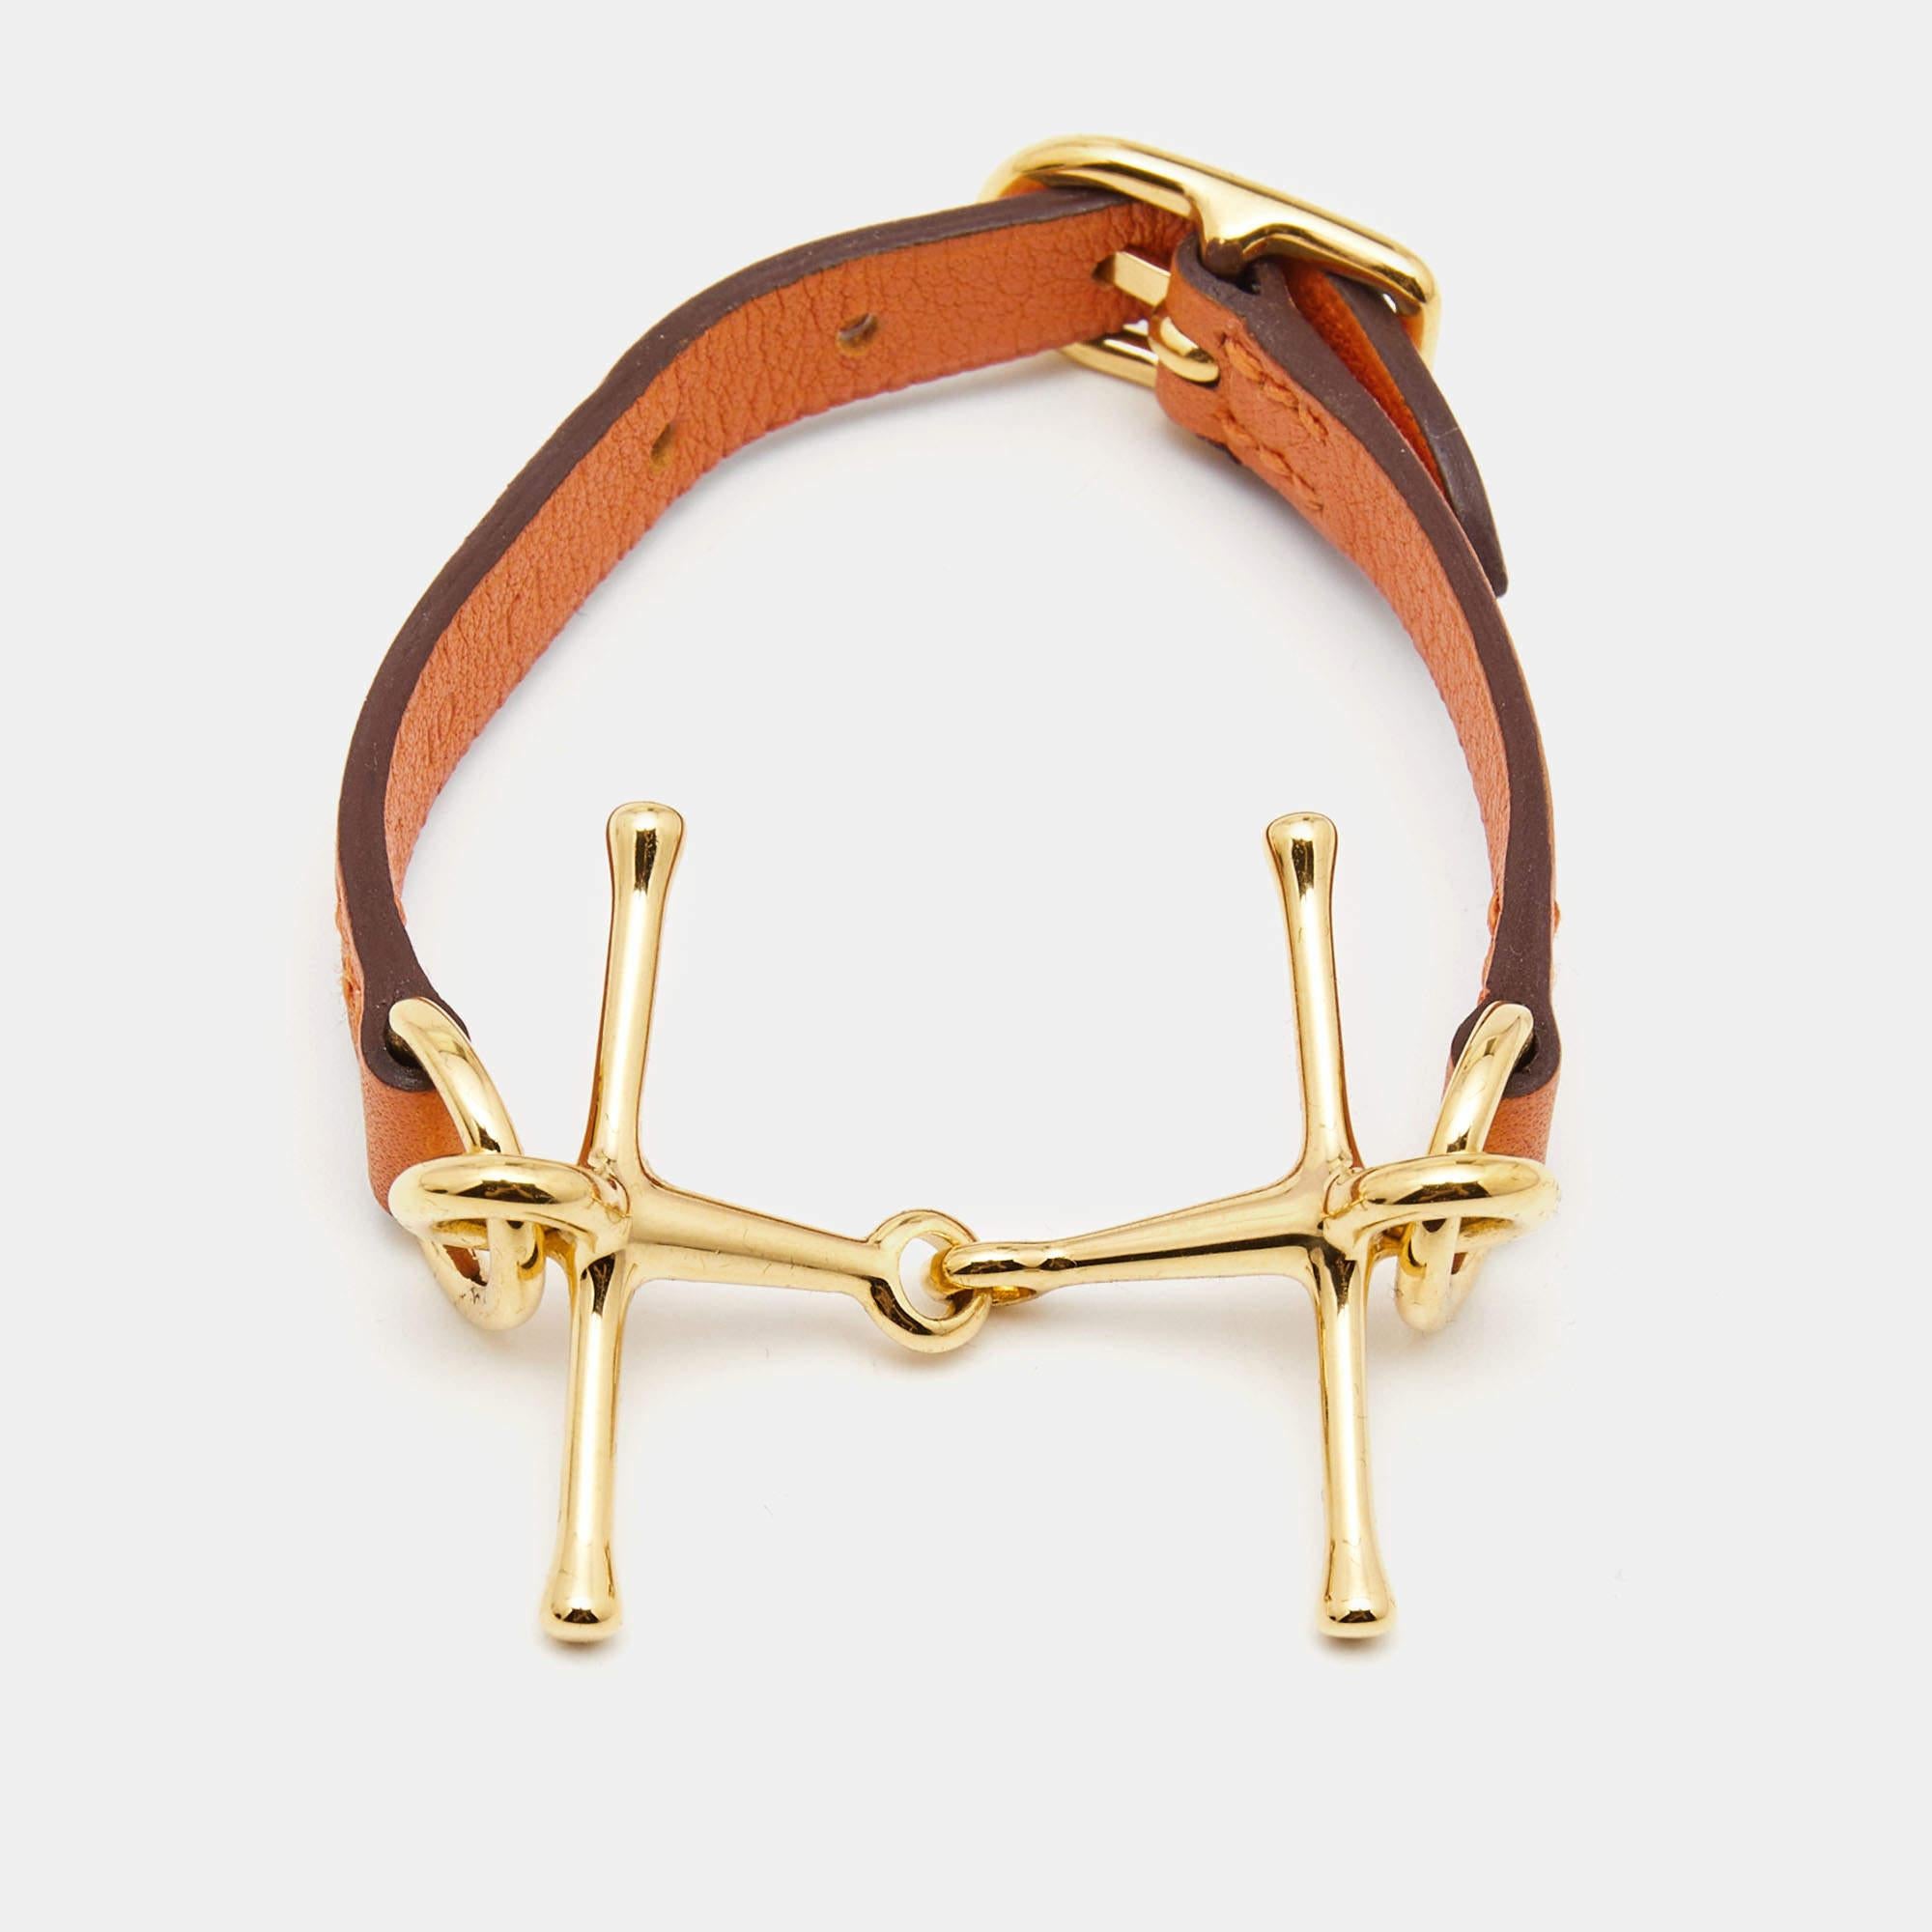 Elevate your wrist with this Hermes women's bracelet. Meticulously crafted, it exudes elegance and luxury with premium materials, exquisite detailing, and a timeless design, making it the perfect statement piece.

